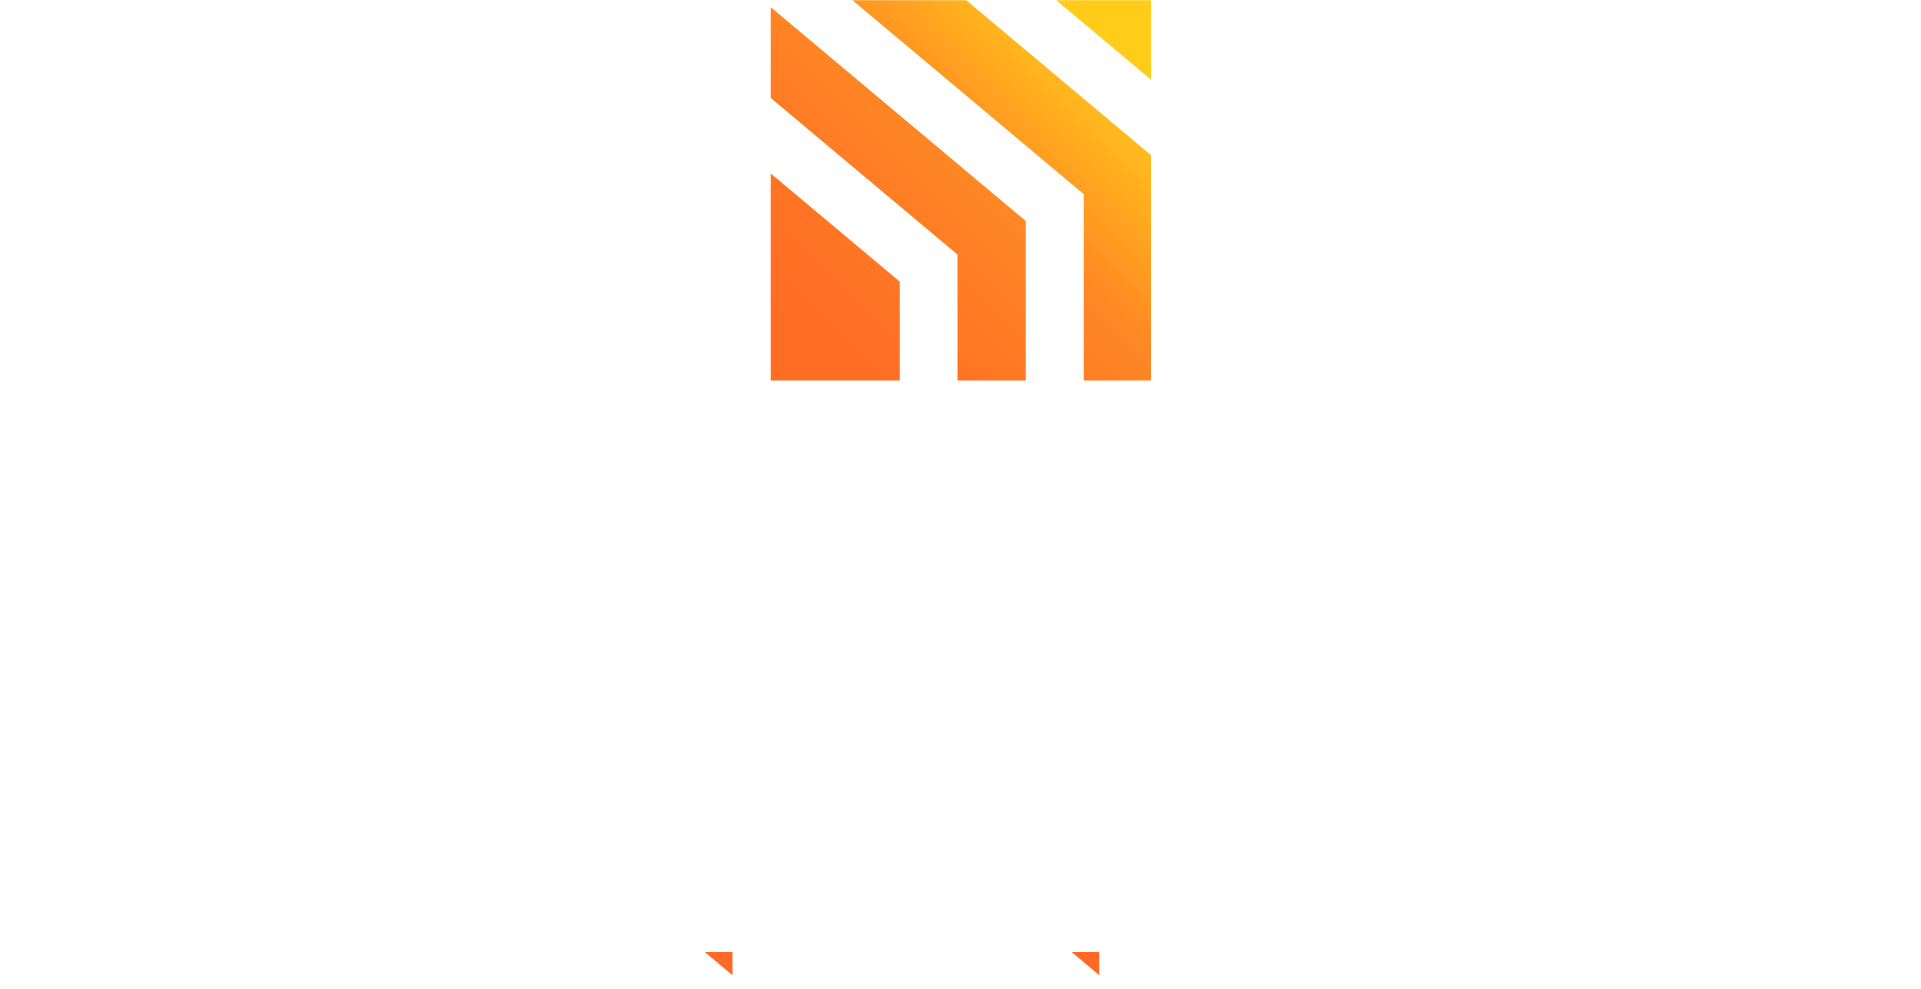 Contractor Growth Network